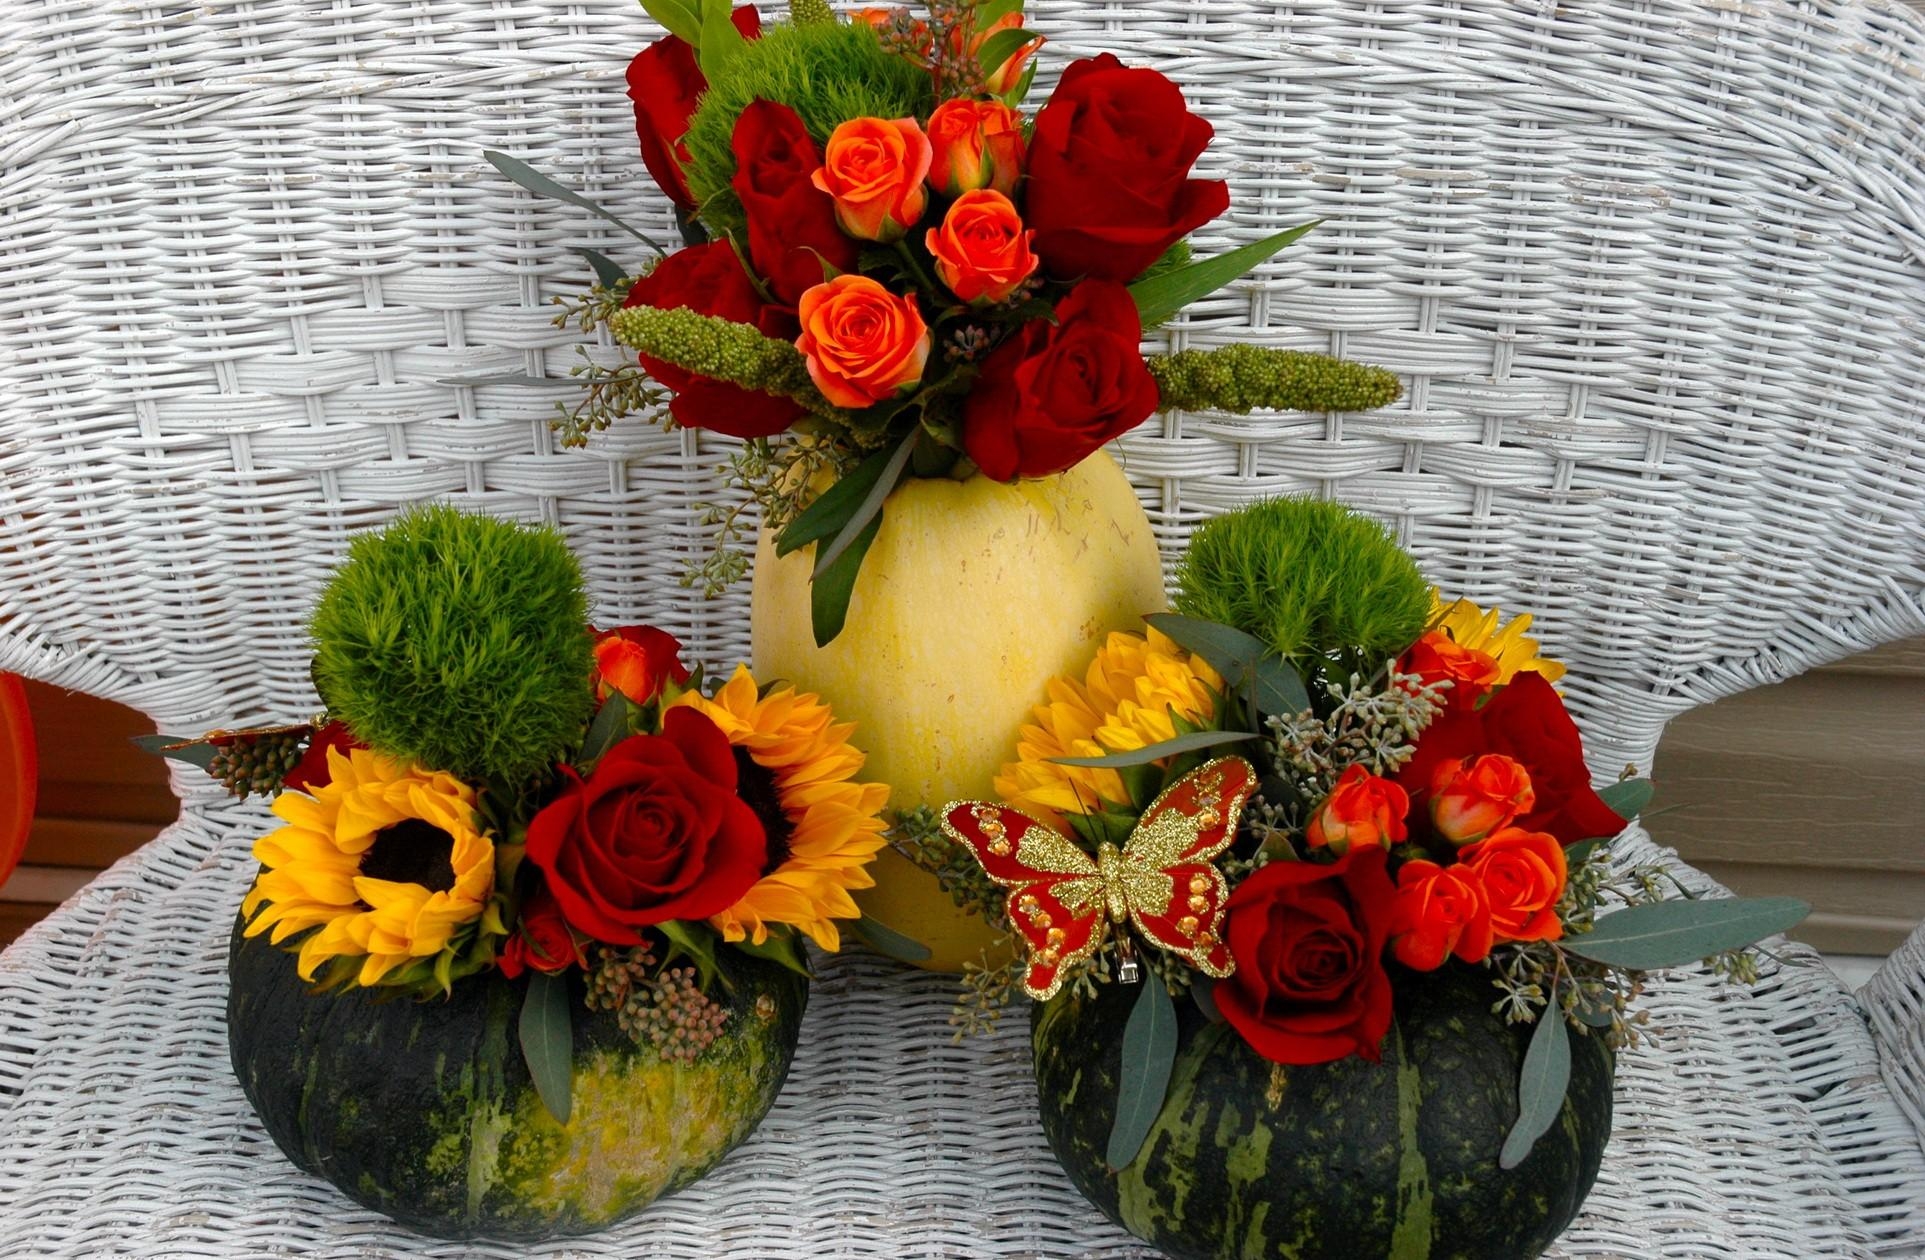 bouquets, pumpkin, butterfly, flowers, sunflowers, roses, composition